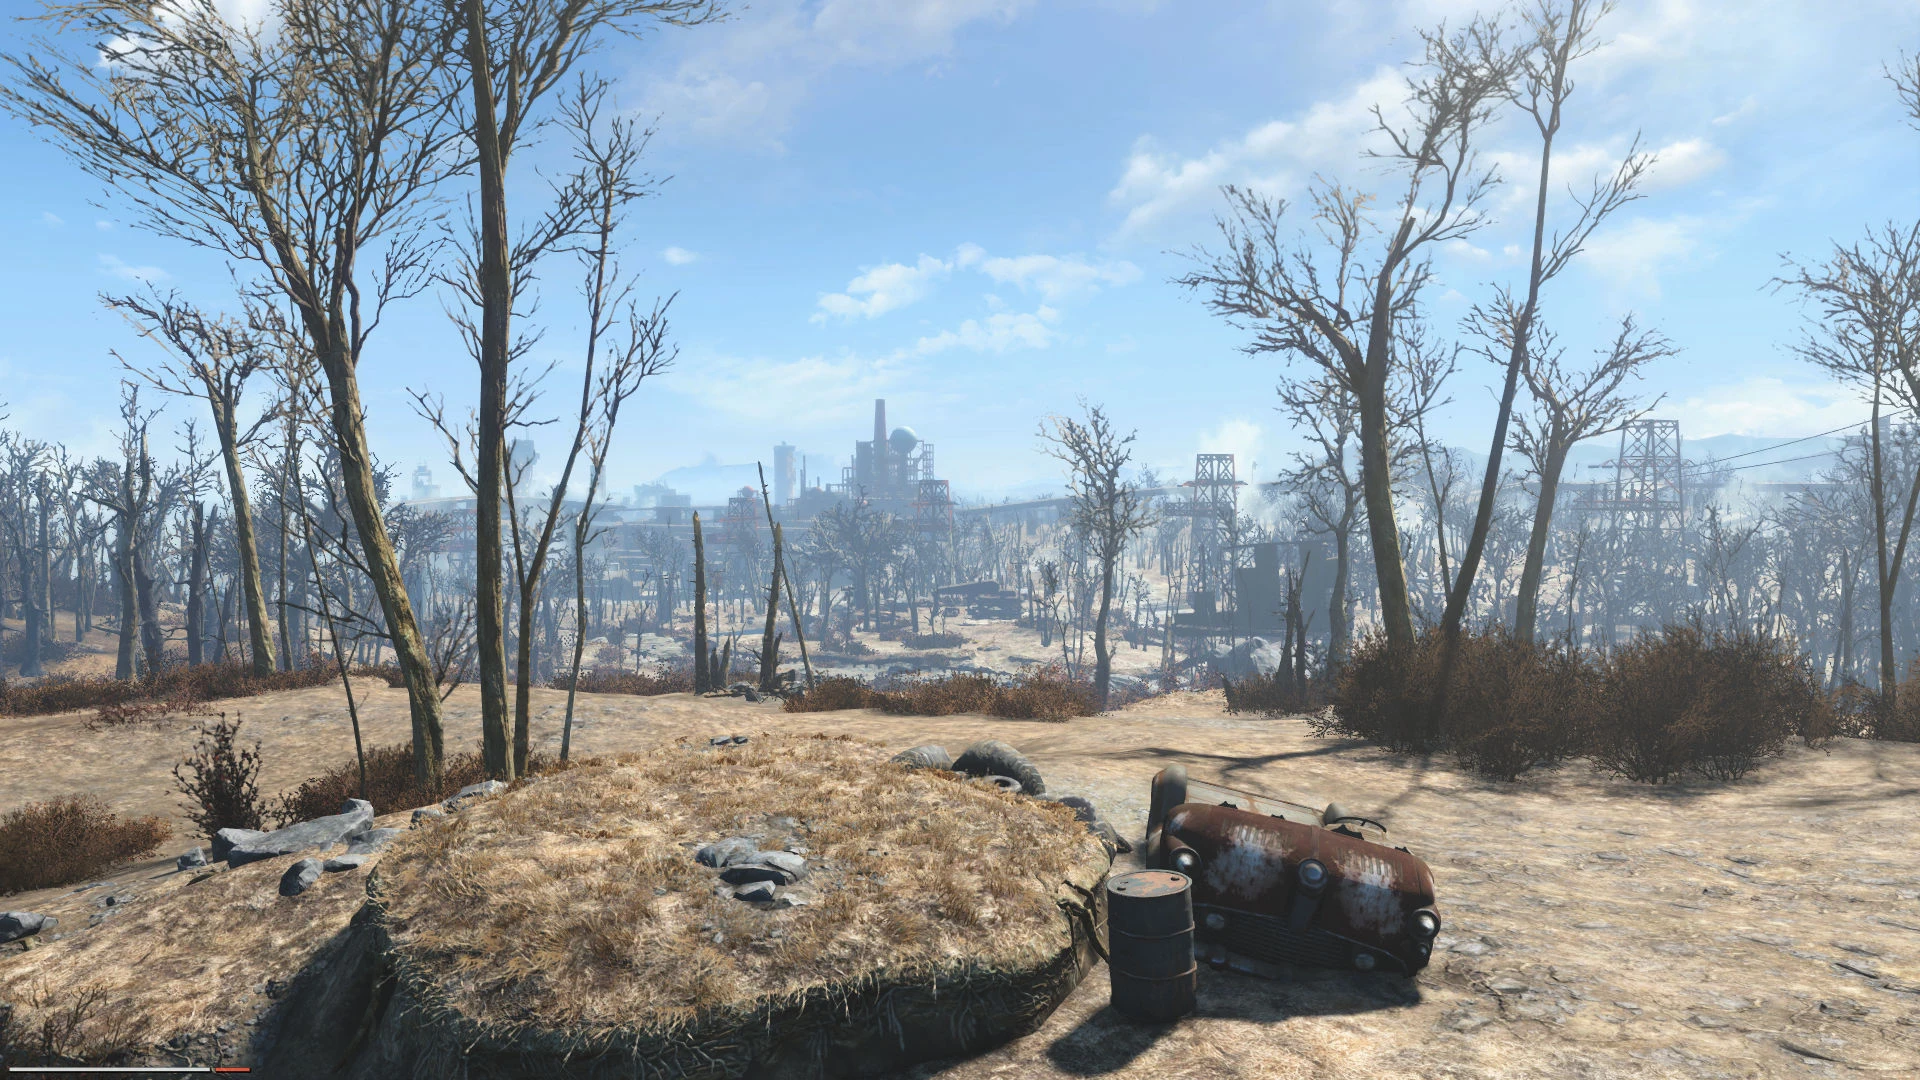 fallout 4 best grass and tree mod